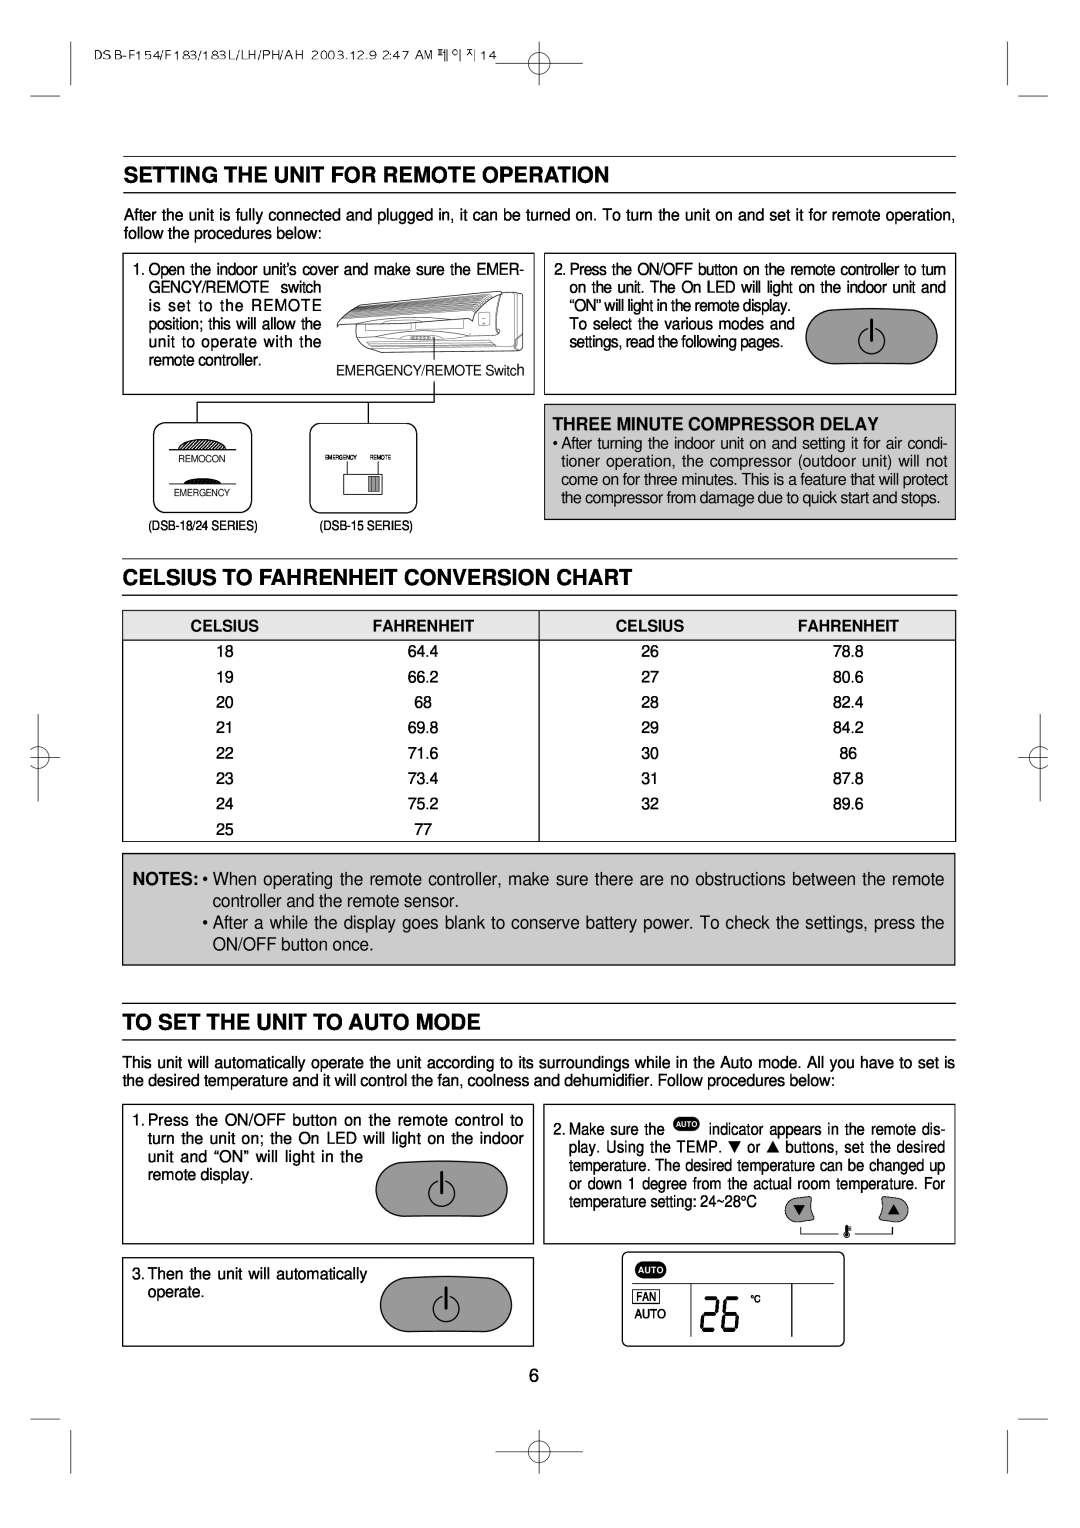 Daewoo DSB-F154LH owner manual Setting The Unit For Remote Operation, Celsius To Fahrenheit Conversion Chart 